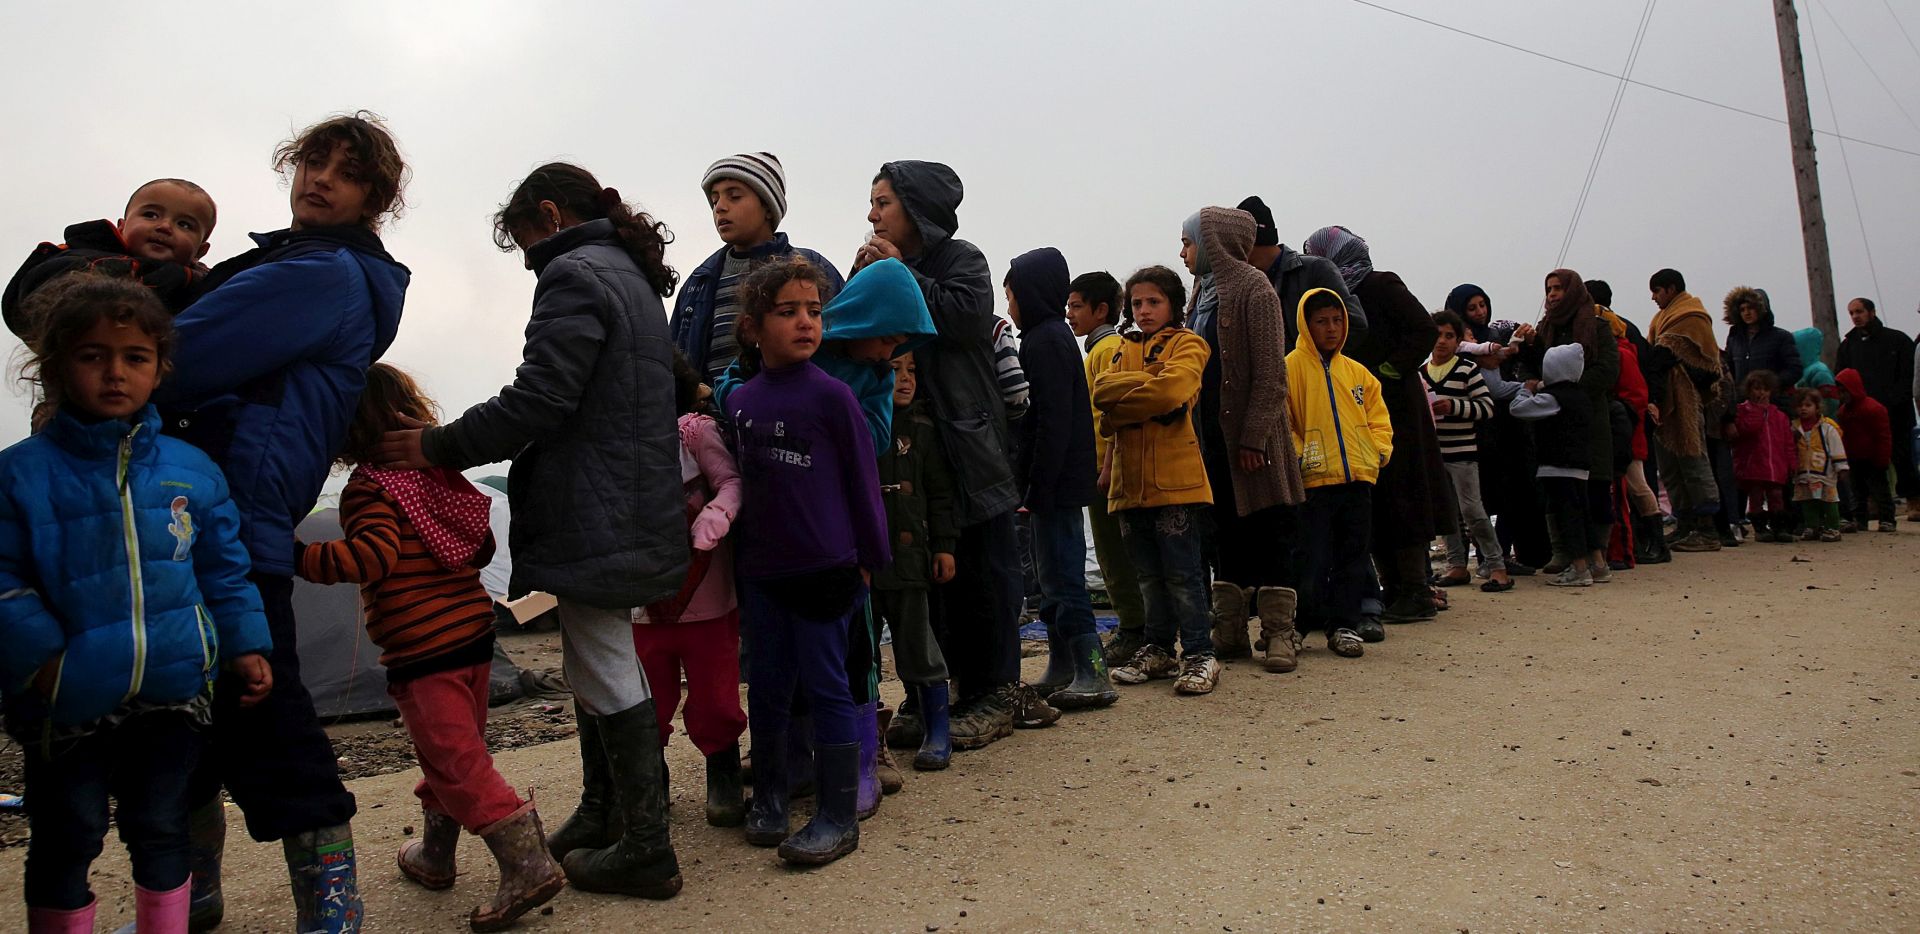 epa05217884 Refugees wait in line to receive food in the make-shift camp for refugees in Idomeni, north Greece, some meters from the borderline with FYROM, 18 March 2016. Migration restrictions along the so-called Balkan route, the main path for migrants and refugees from the Middle East to the EU, has left thousands of migrants trapped in Greece.  EPA/ORESTIS PANAGIOTOU